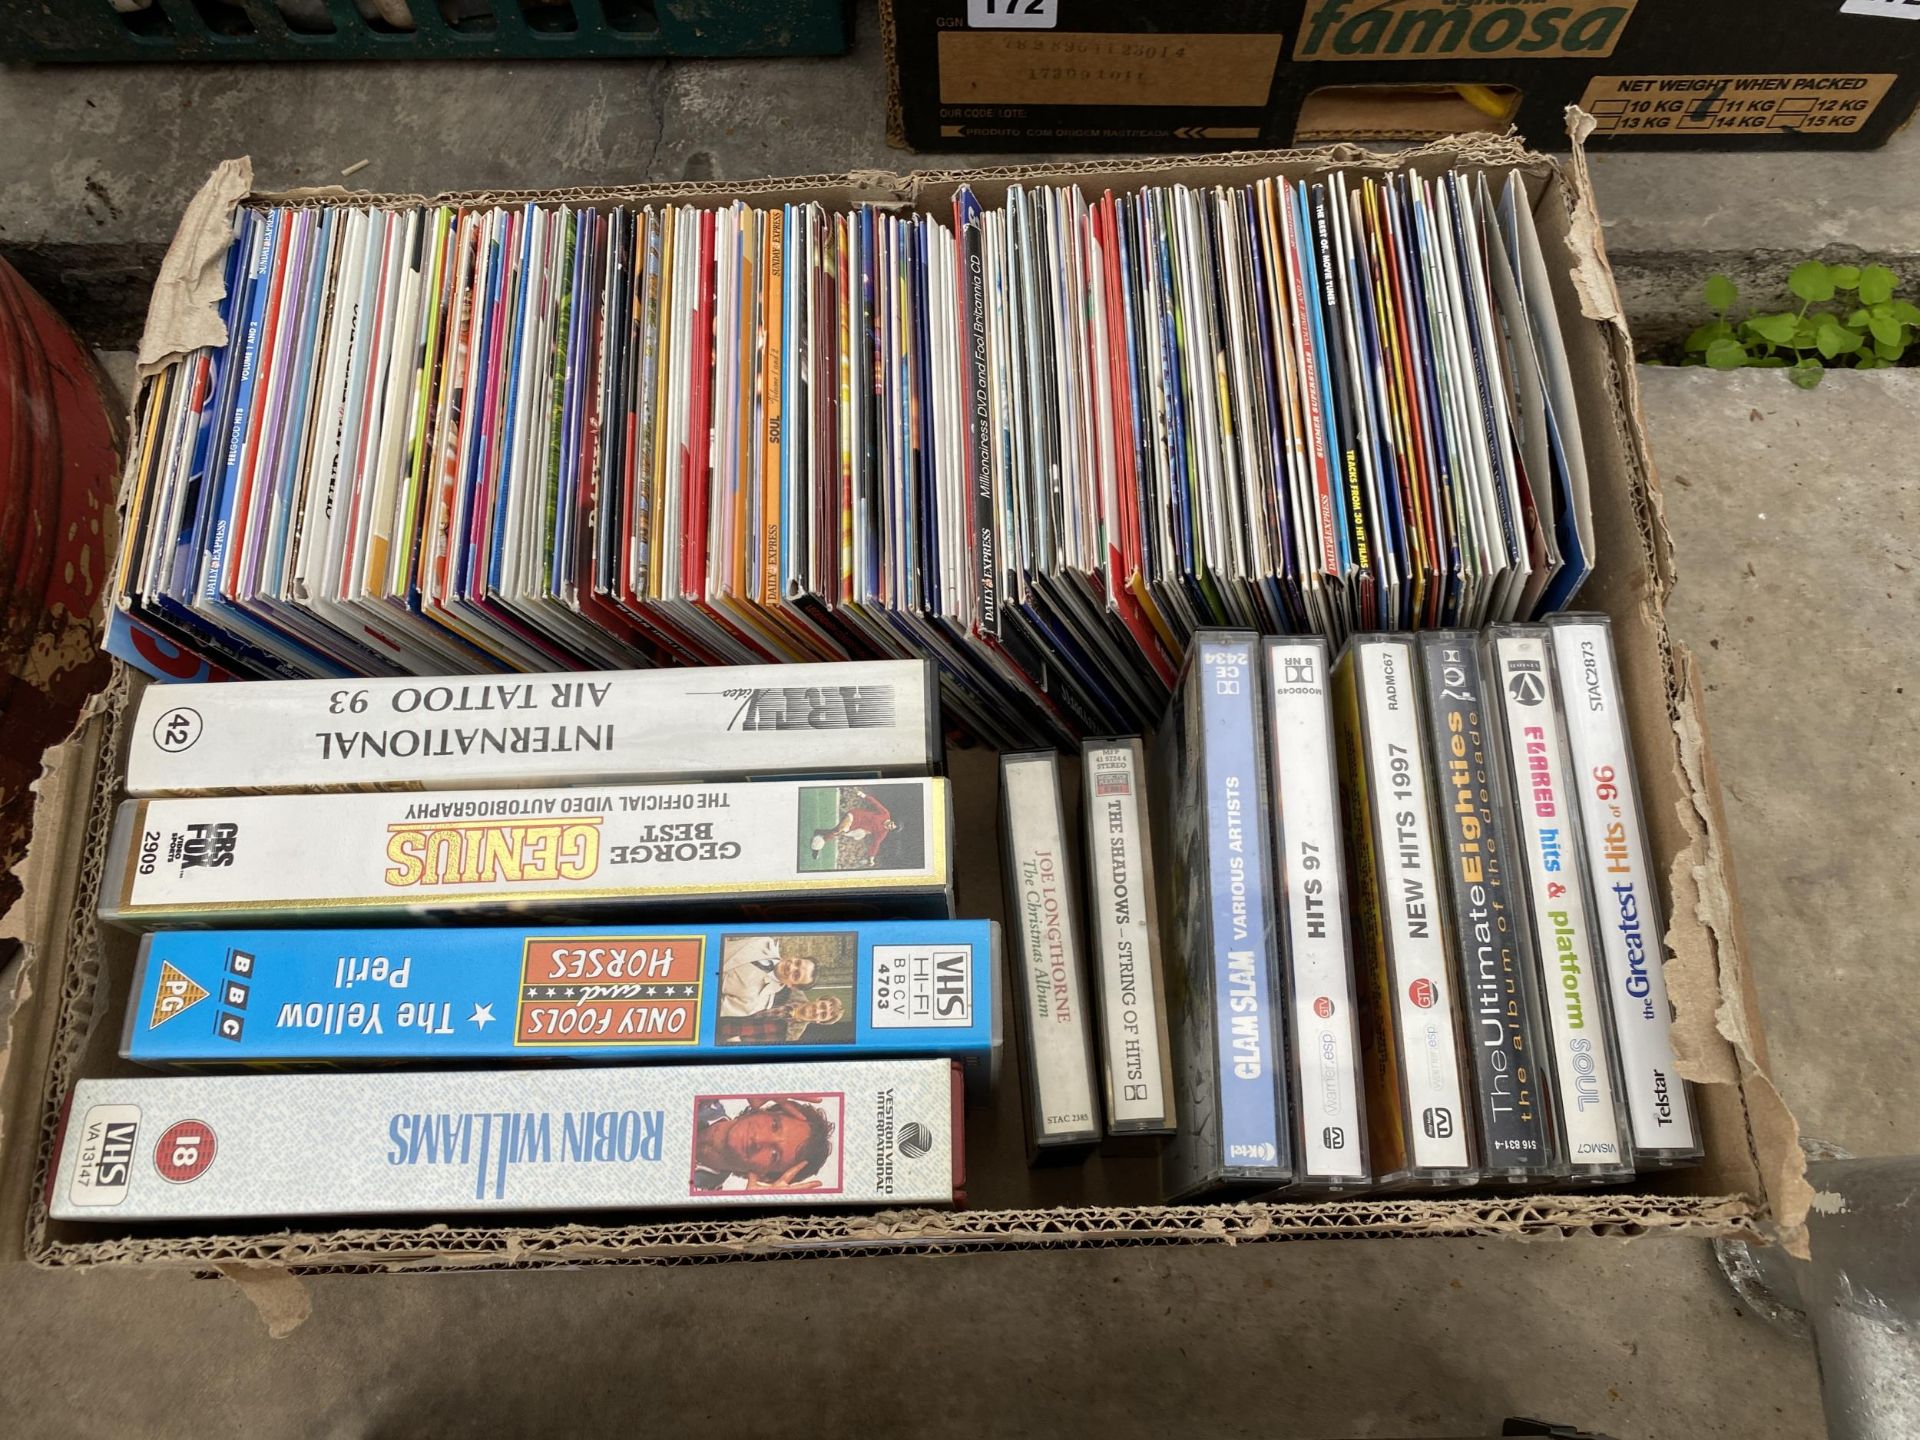 AN ASSORTMENT OF CASSETTES, CDS AND VHS VIDEOS - Image 3 of 3